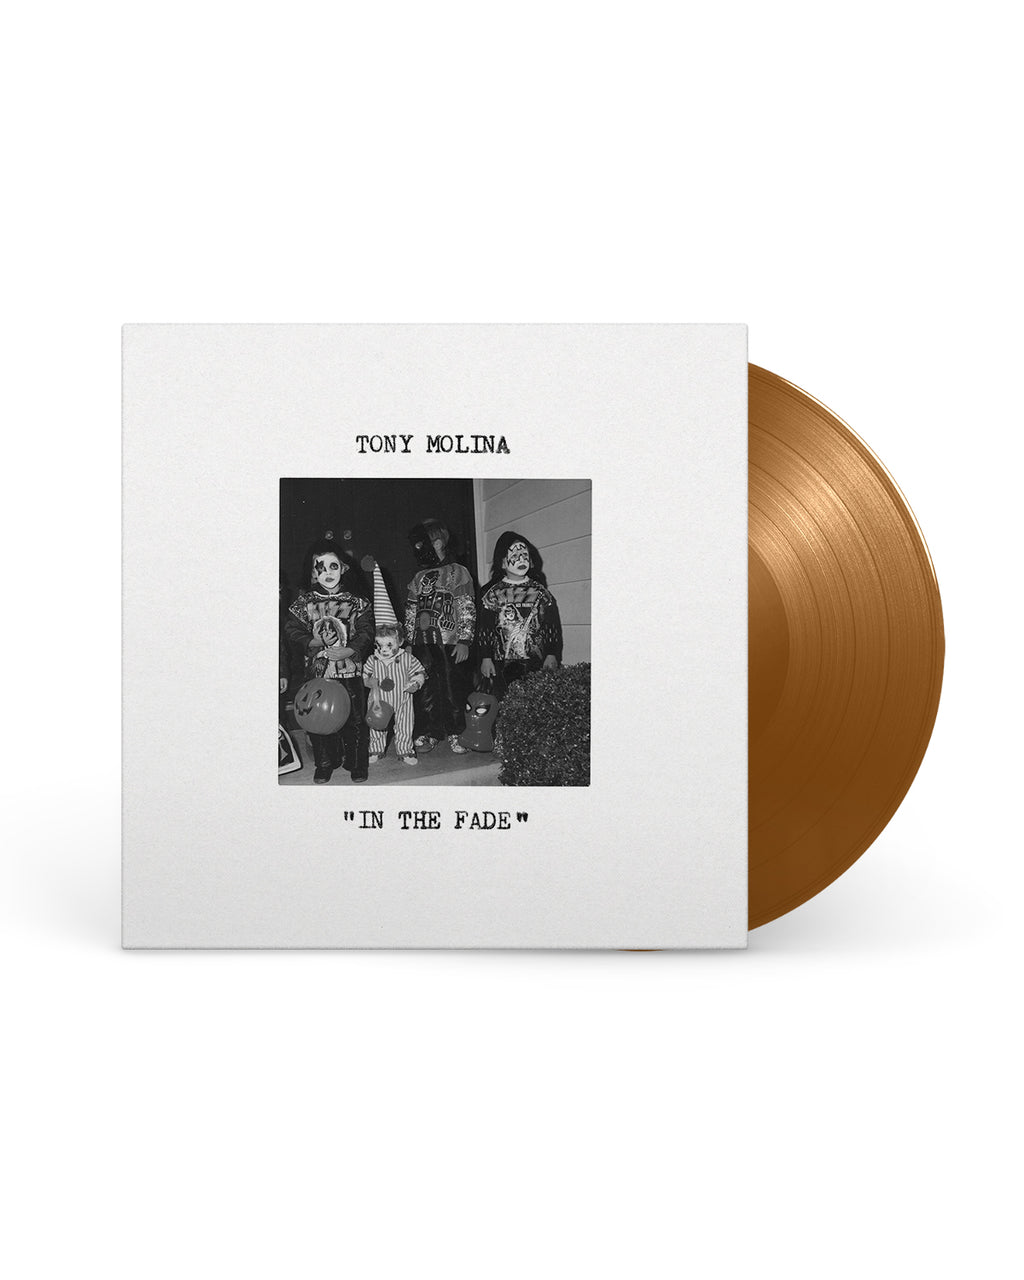 Tony Molina's "In The Fade" LP - Opaque Brown 1